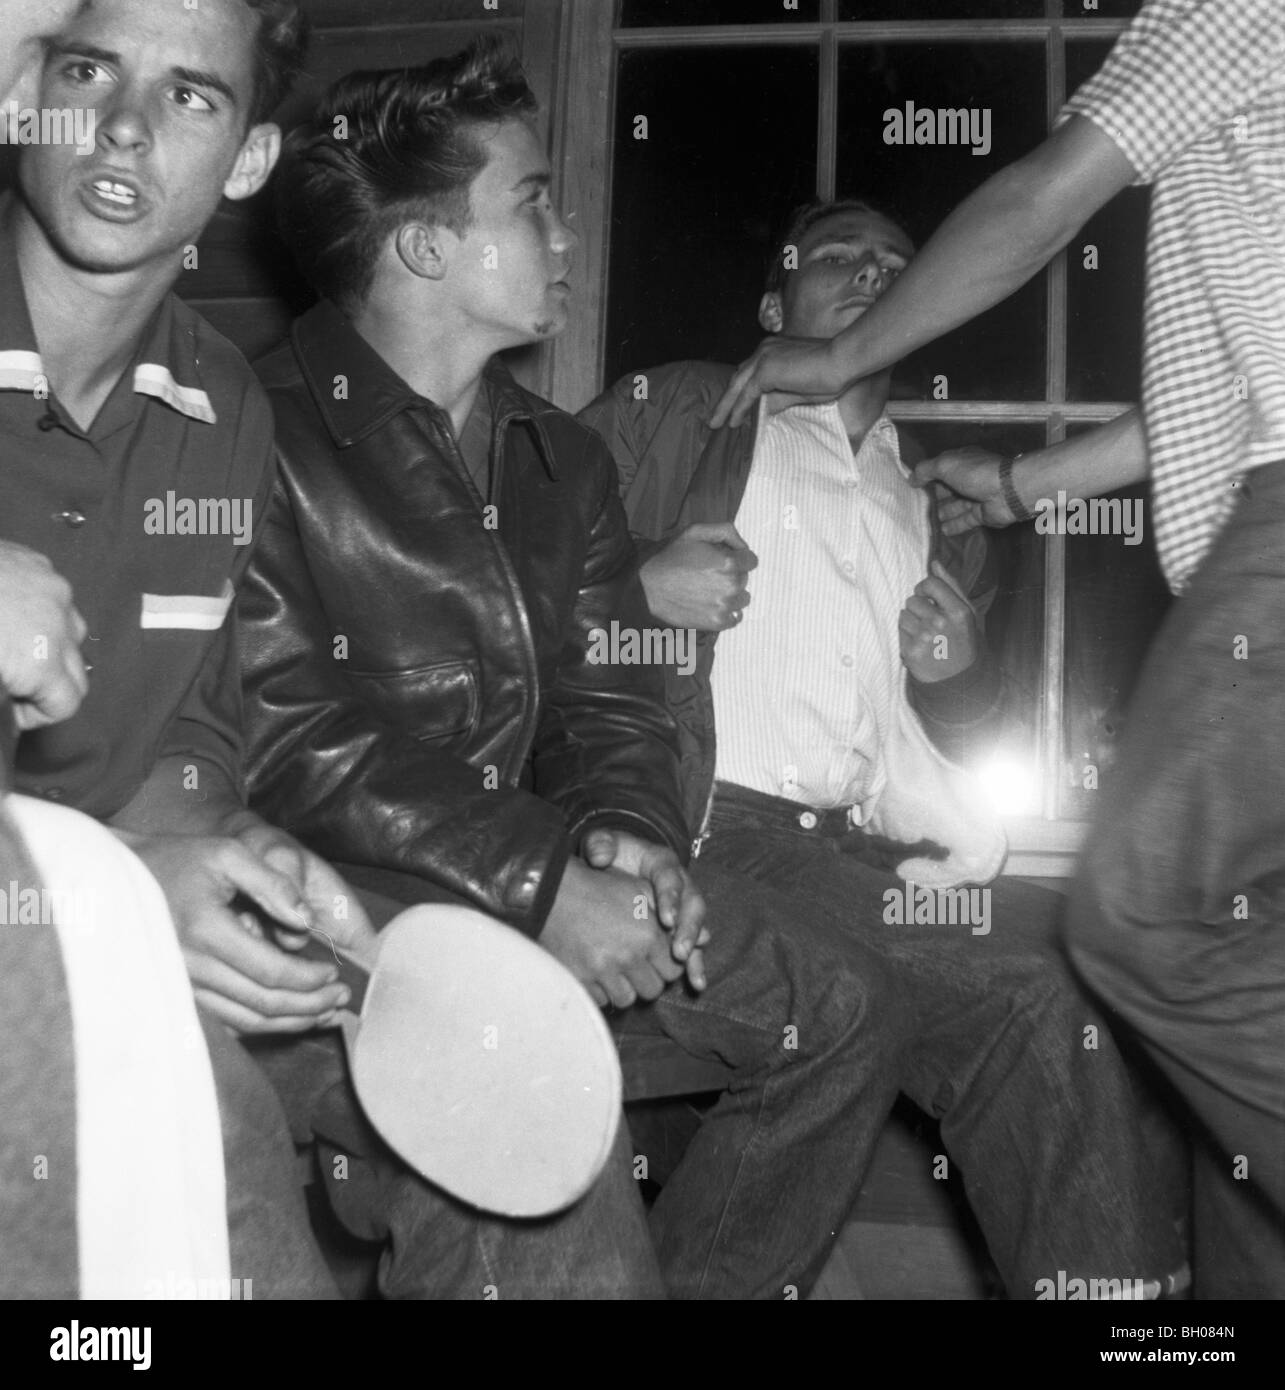 A group of young men hang out during a party in the late 1950s. Stock Photo